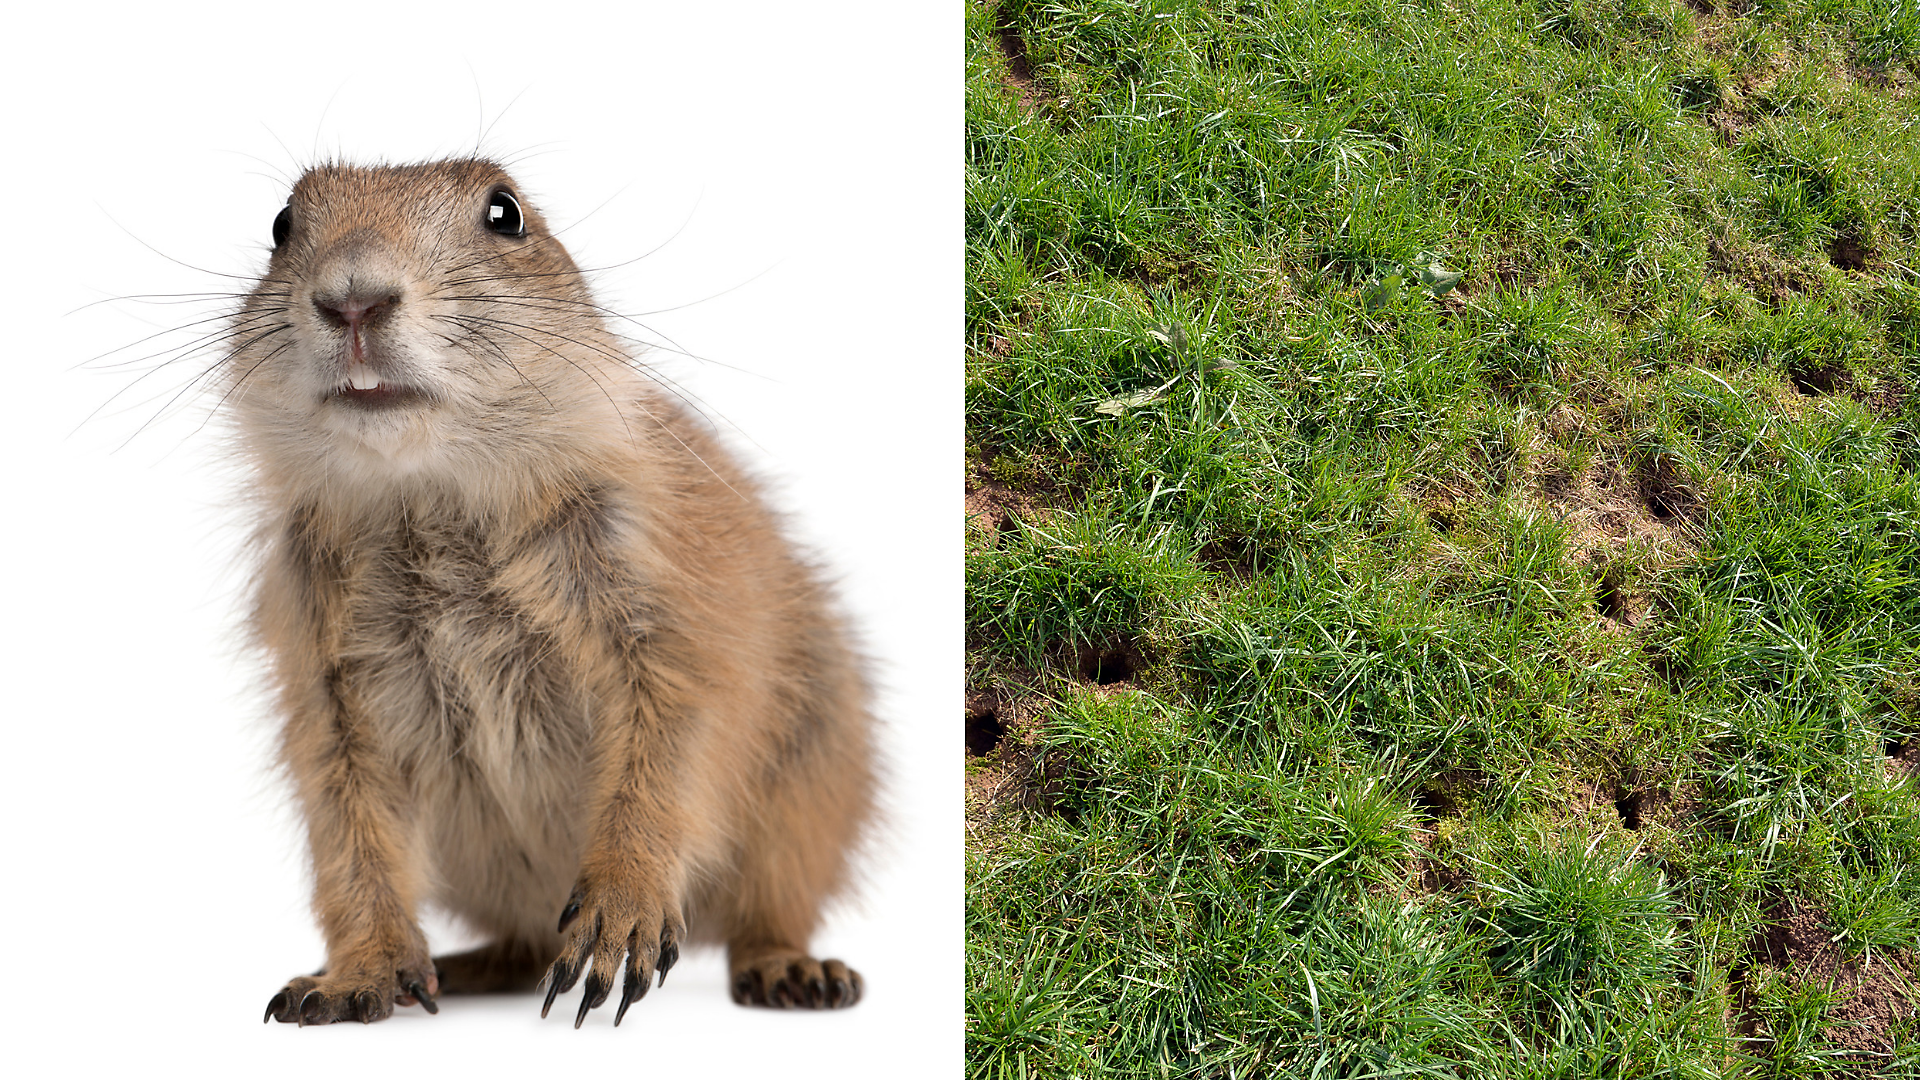 Tips For Identifying Moles Voles And Gophers,Hot Buttered Rum Batter